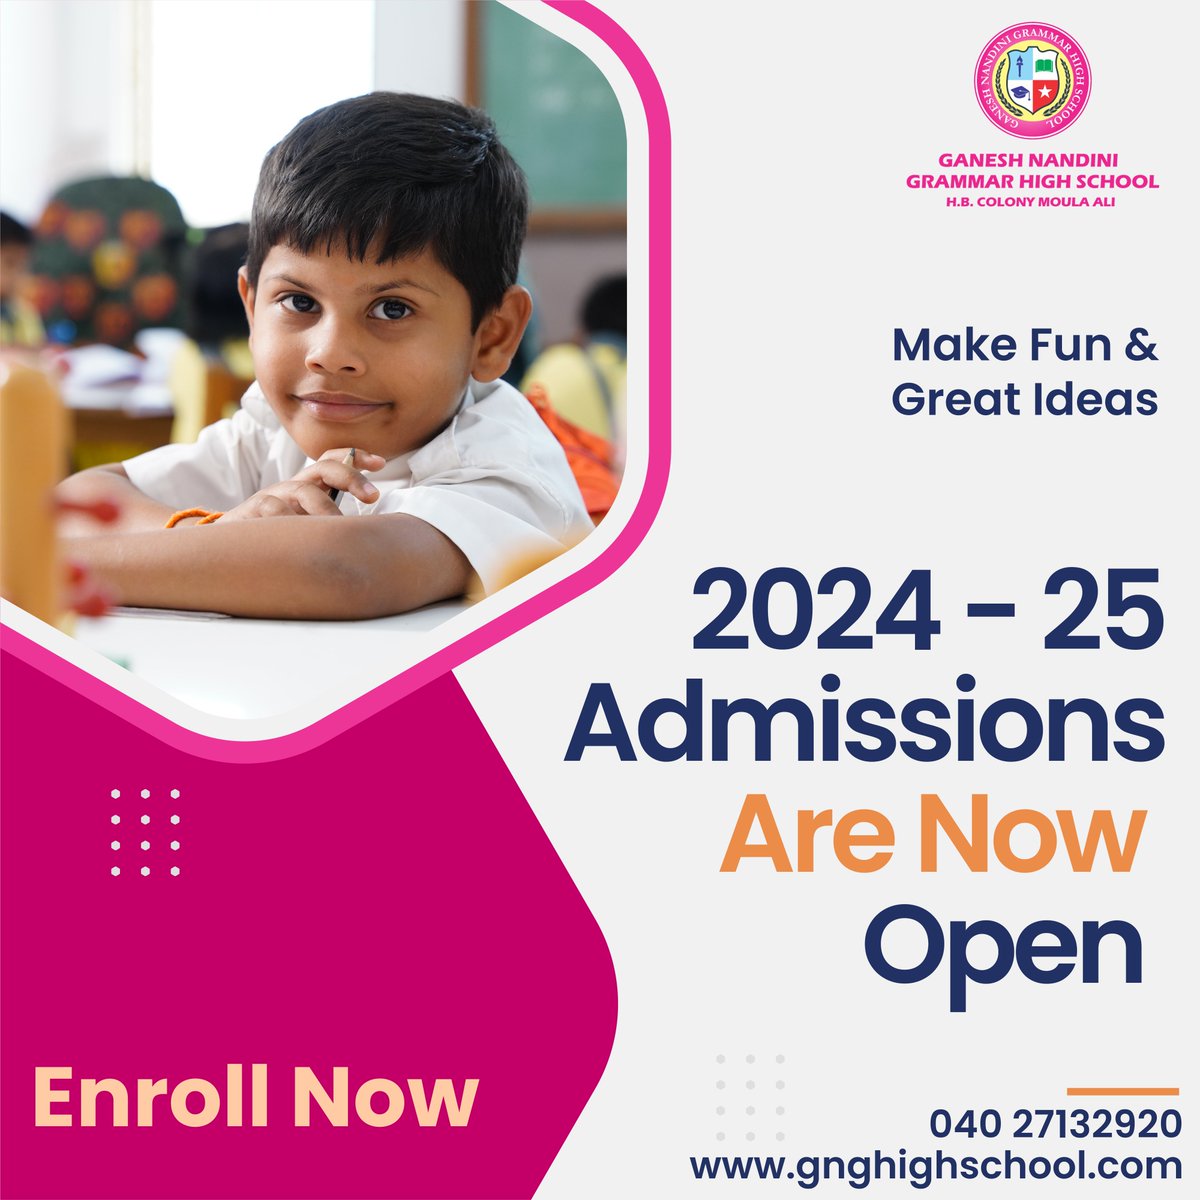 2024 Admissions Are Now Open

The Academic Year 2024 Admissions are now in progress

Enroll Now

Contact us: 04027132920
website: gnghighschool.com

#gnghighschool #AcademicSuccess #AcademicExcellence #Admissions2024 #schooladmissions2024 #schoolsinsecundrabad #TwitterX